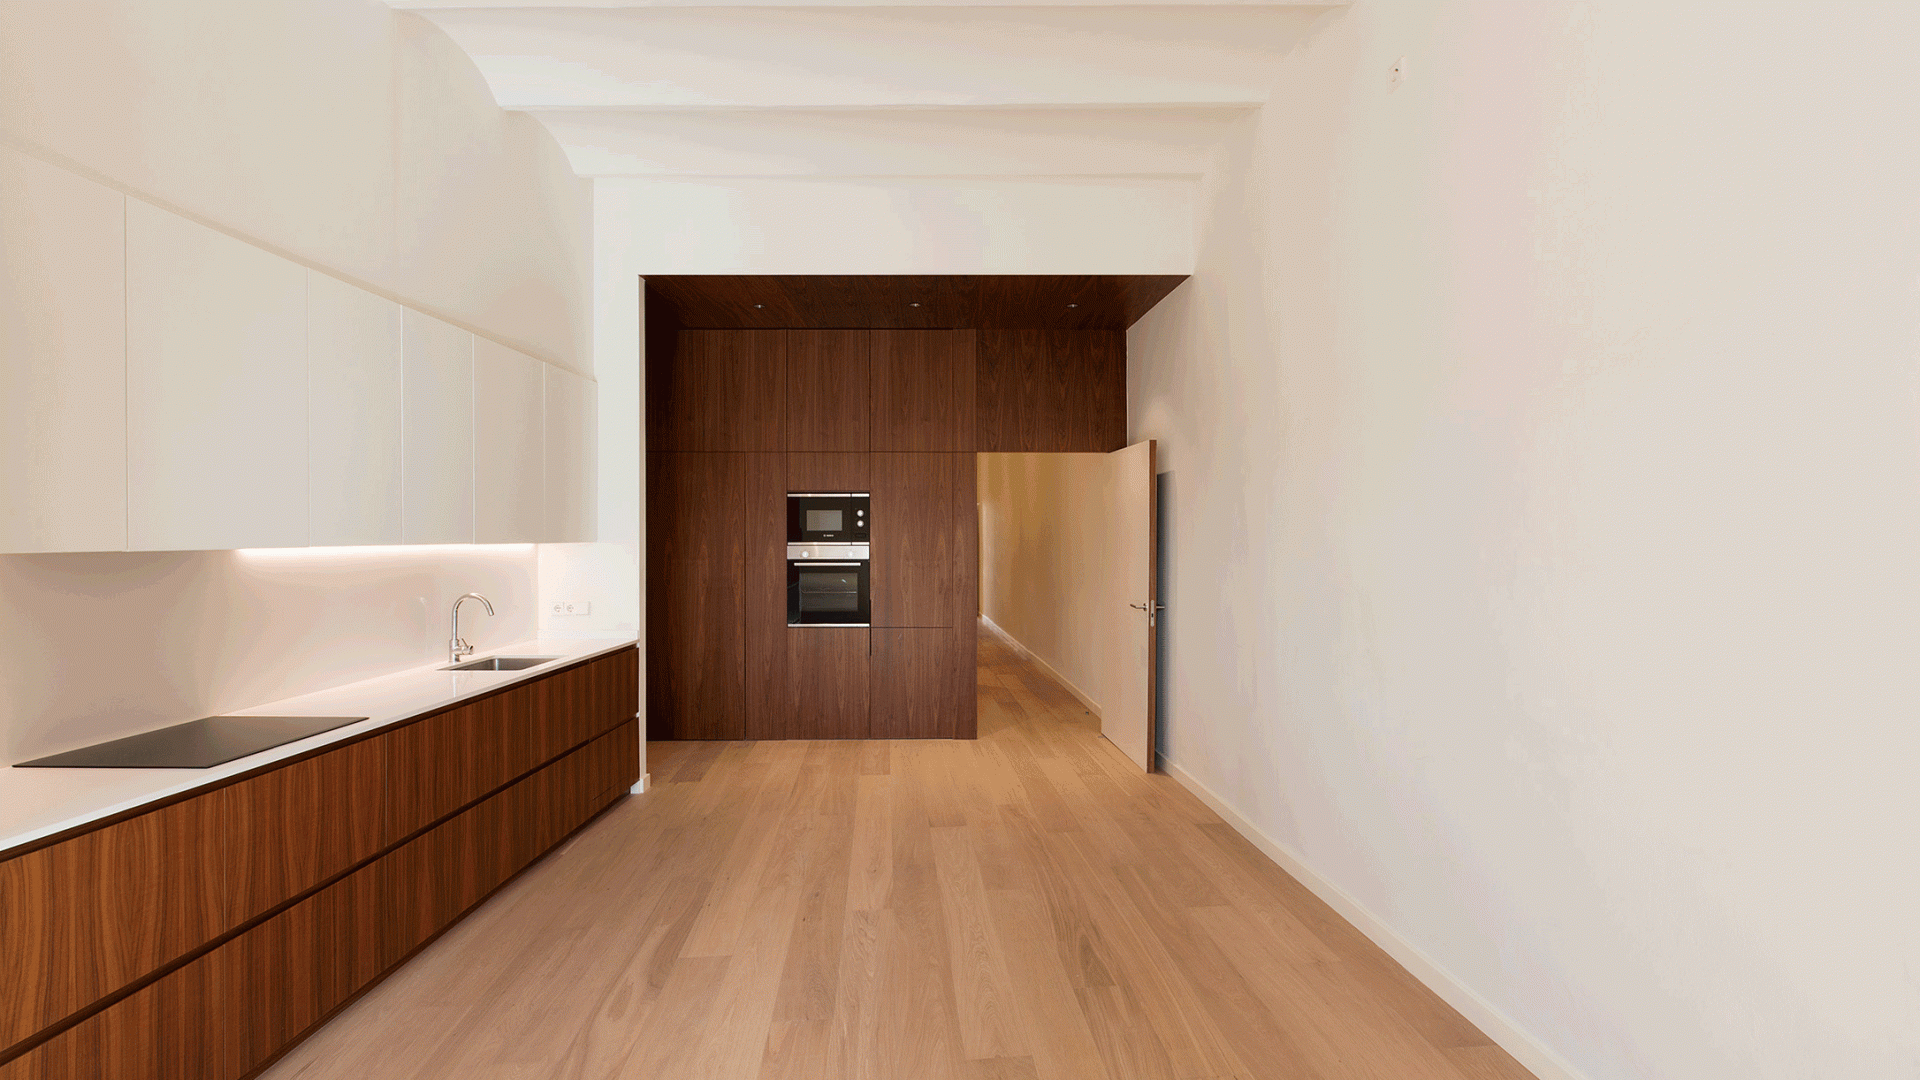 moving image of rebuild kitchen with wooden elements and a door that is opening and closing